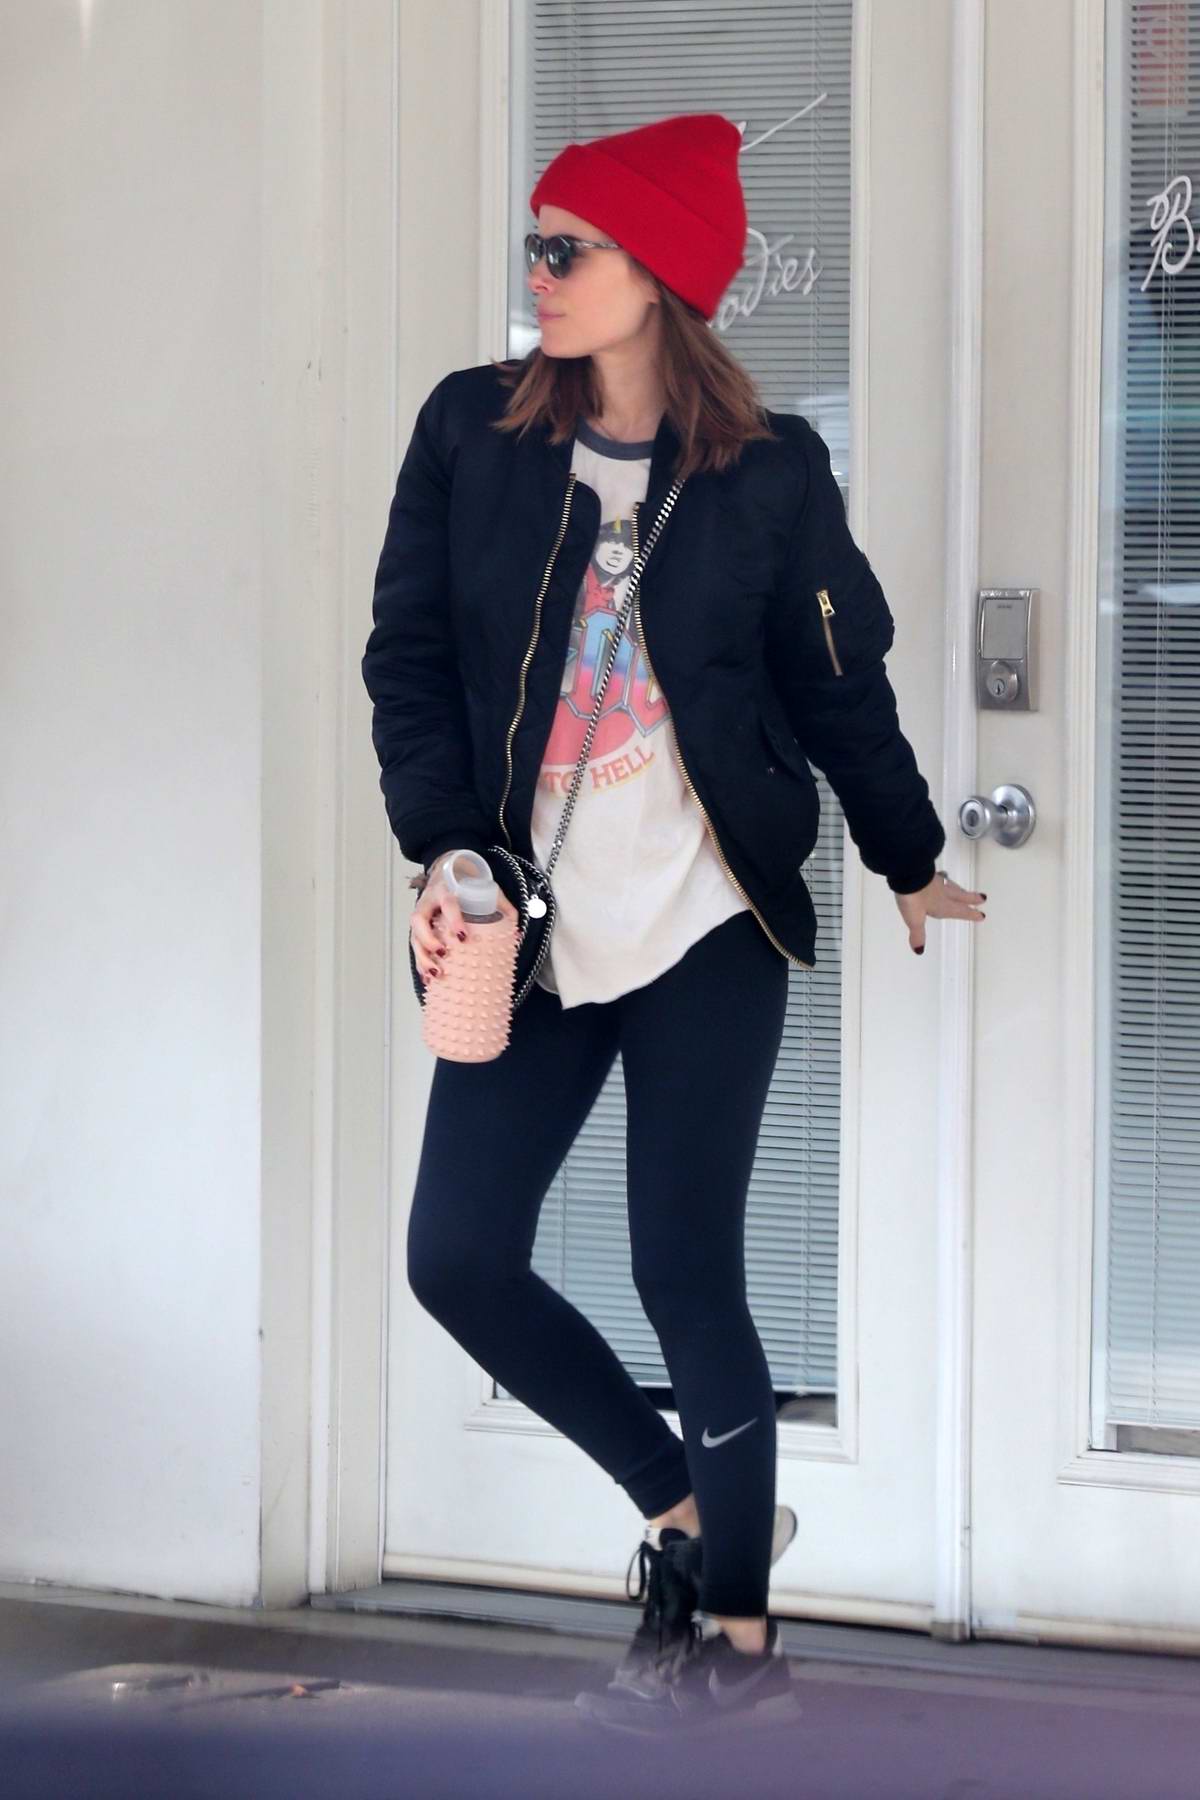 Kate Mara seen wearing a fur-lined denim jacket and black leggings as she  leaves after